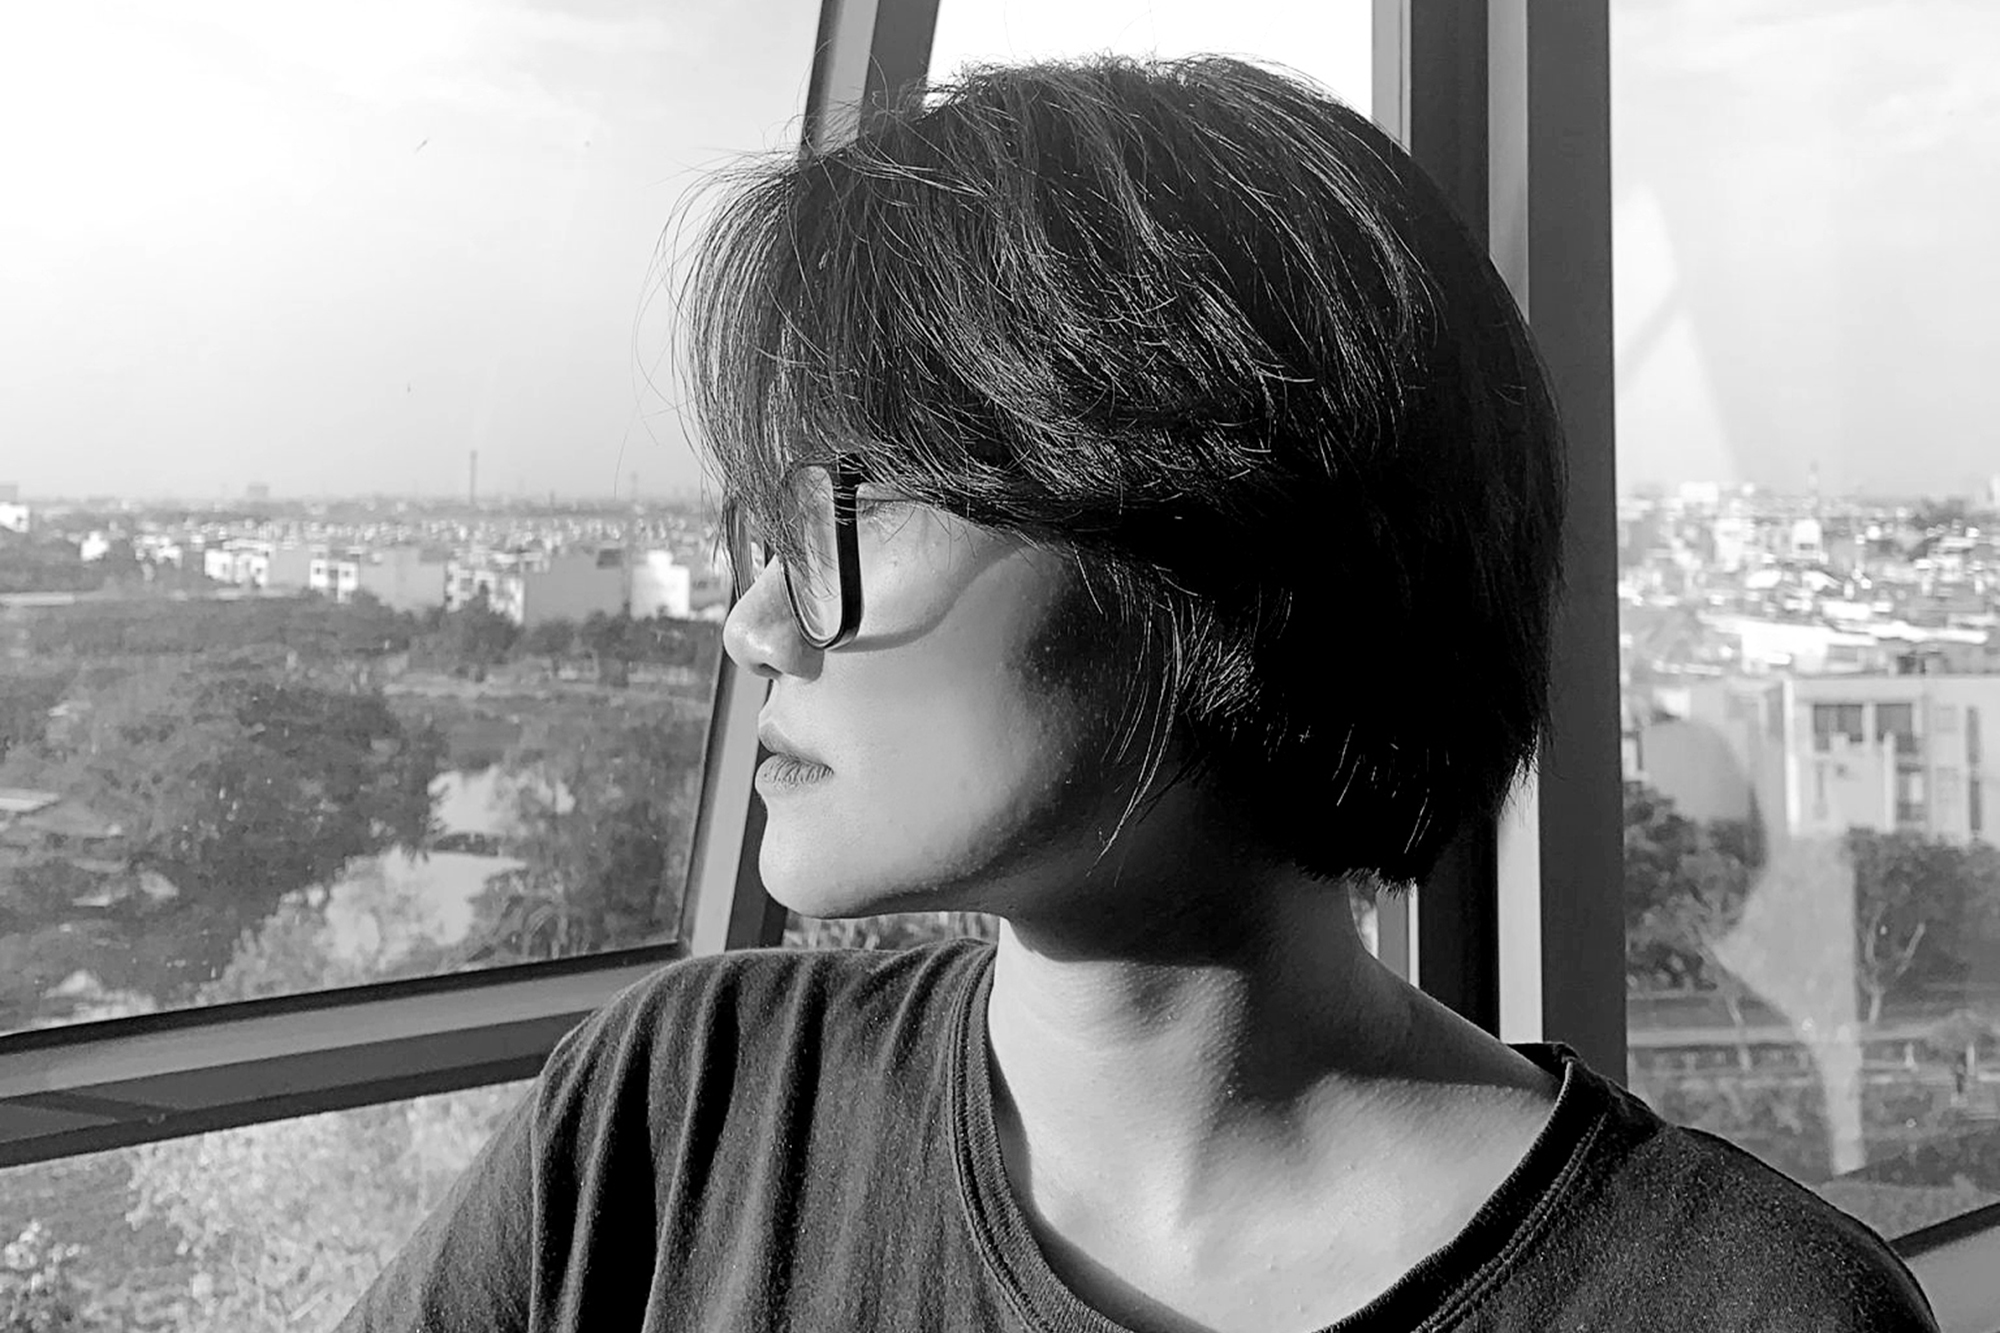 A person with medium-length hair cut in a layered bob with dark framed glasses and wearing a faded black t-shirt. They are looking out the window and in the distant background you can see trees and a city